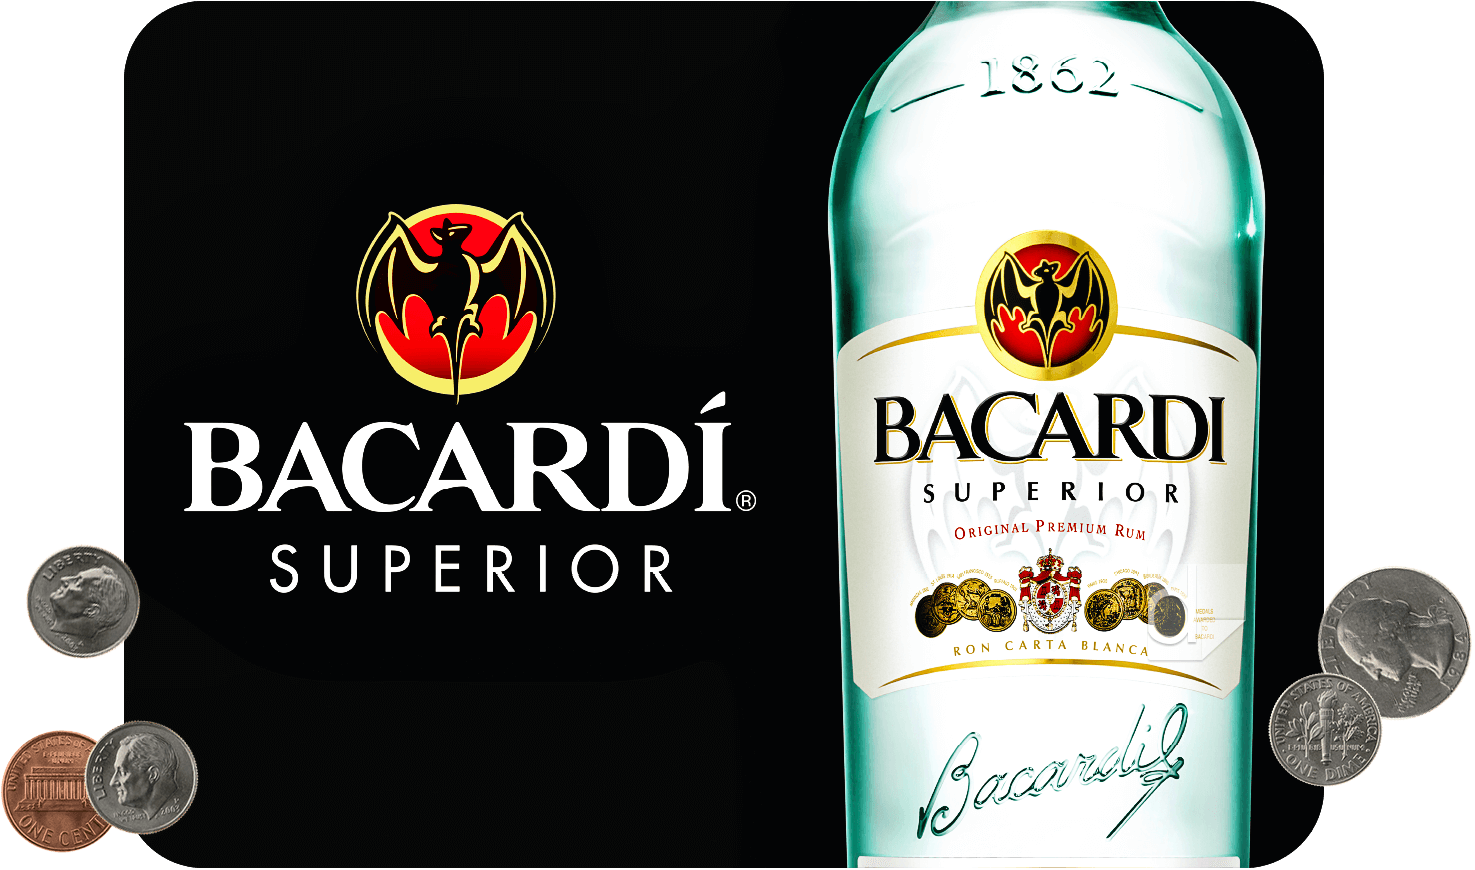 https://www.dilco.com/assets/custom-counter-mats/counter-change-mat-printing-on-vinyl-subsurface-by-dilco-bacardi.png